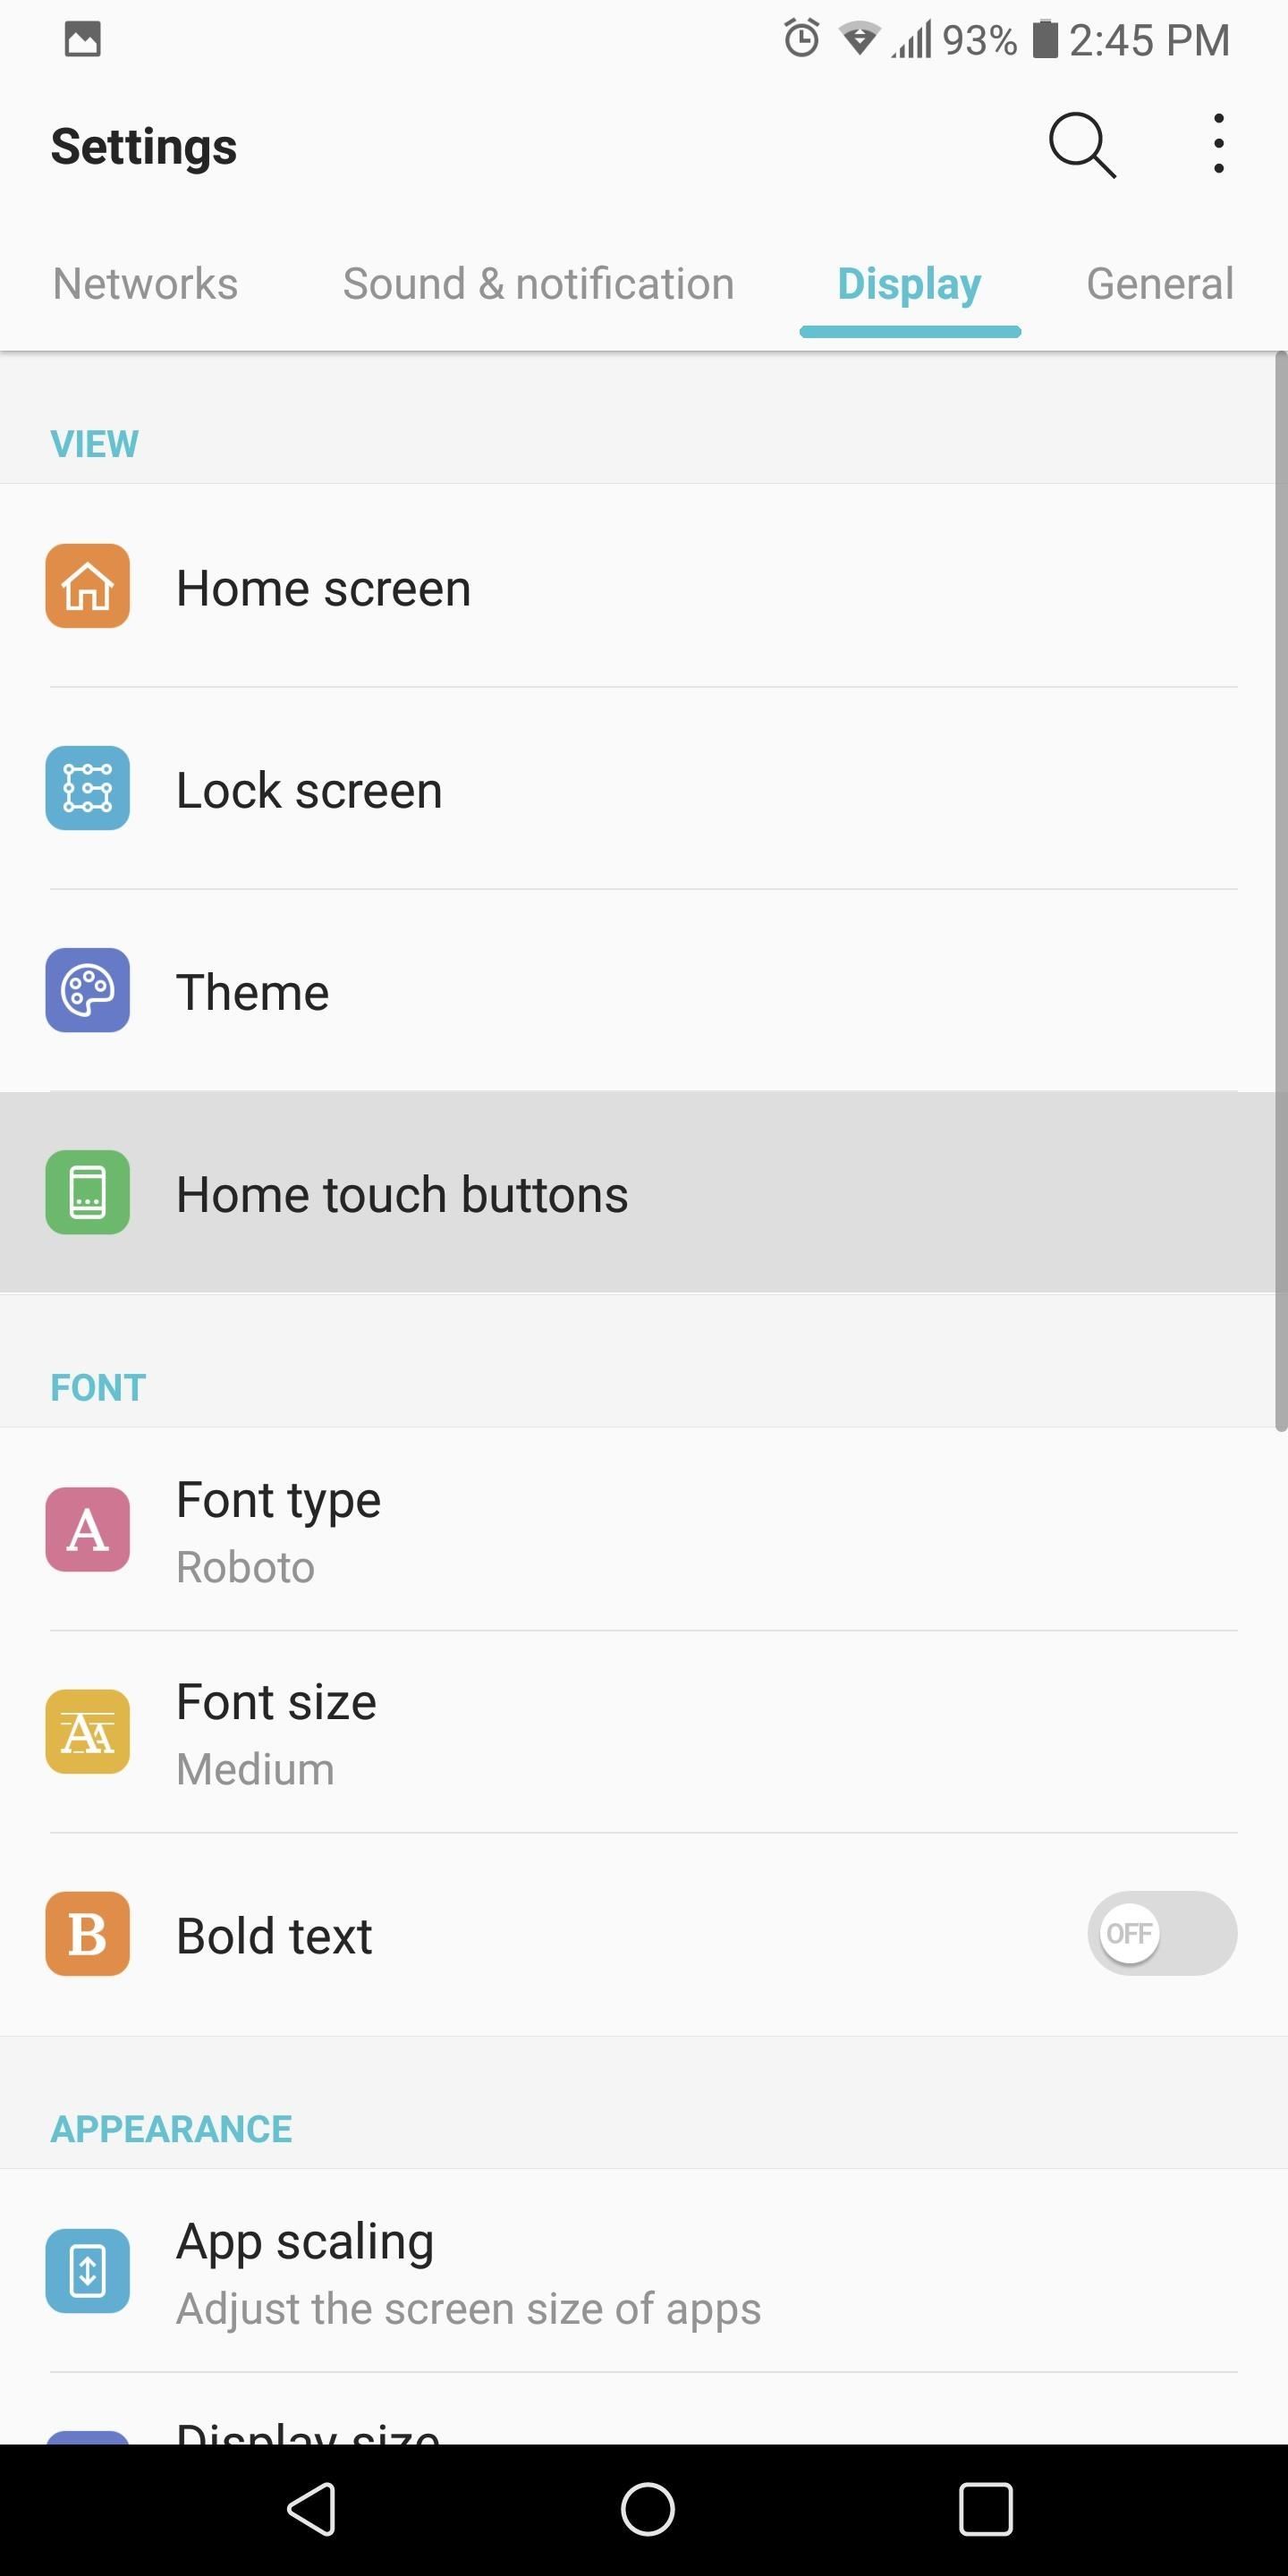 How to Customize the Navigation Buttons on Your LG V30